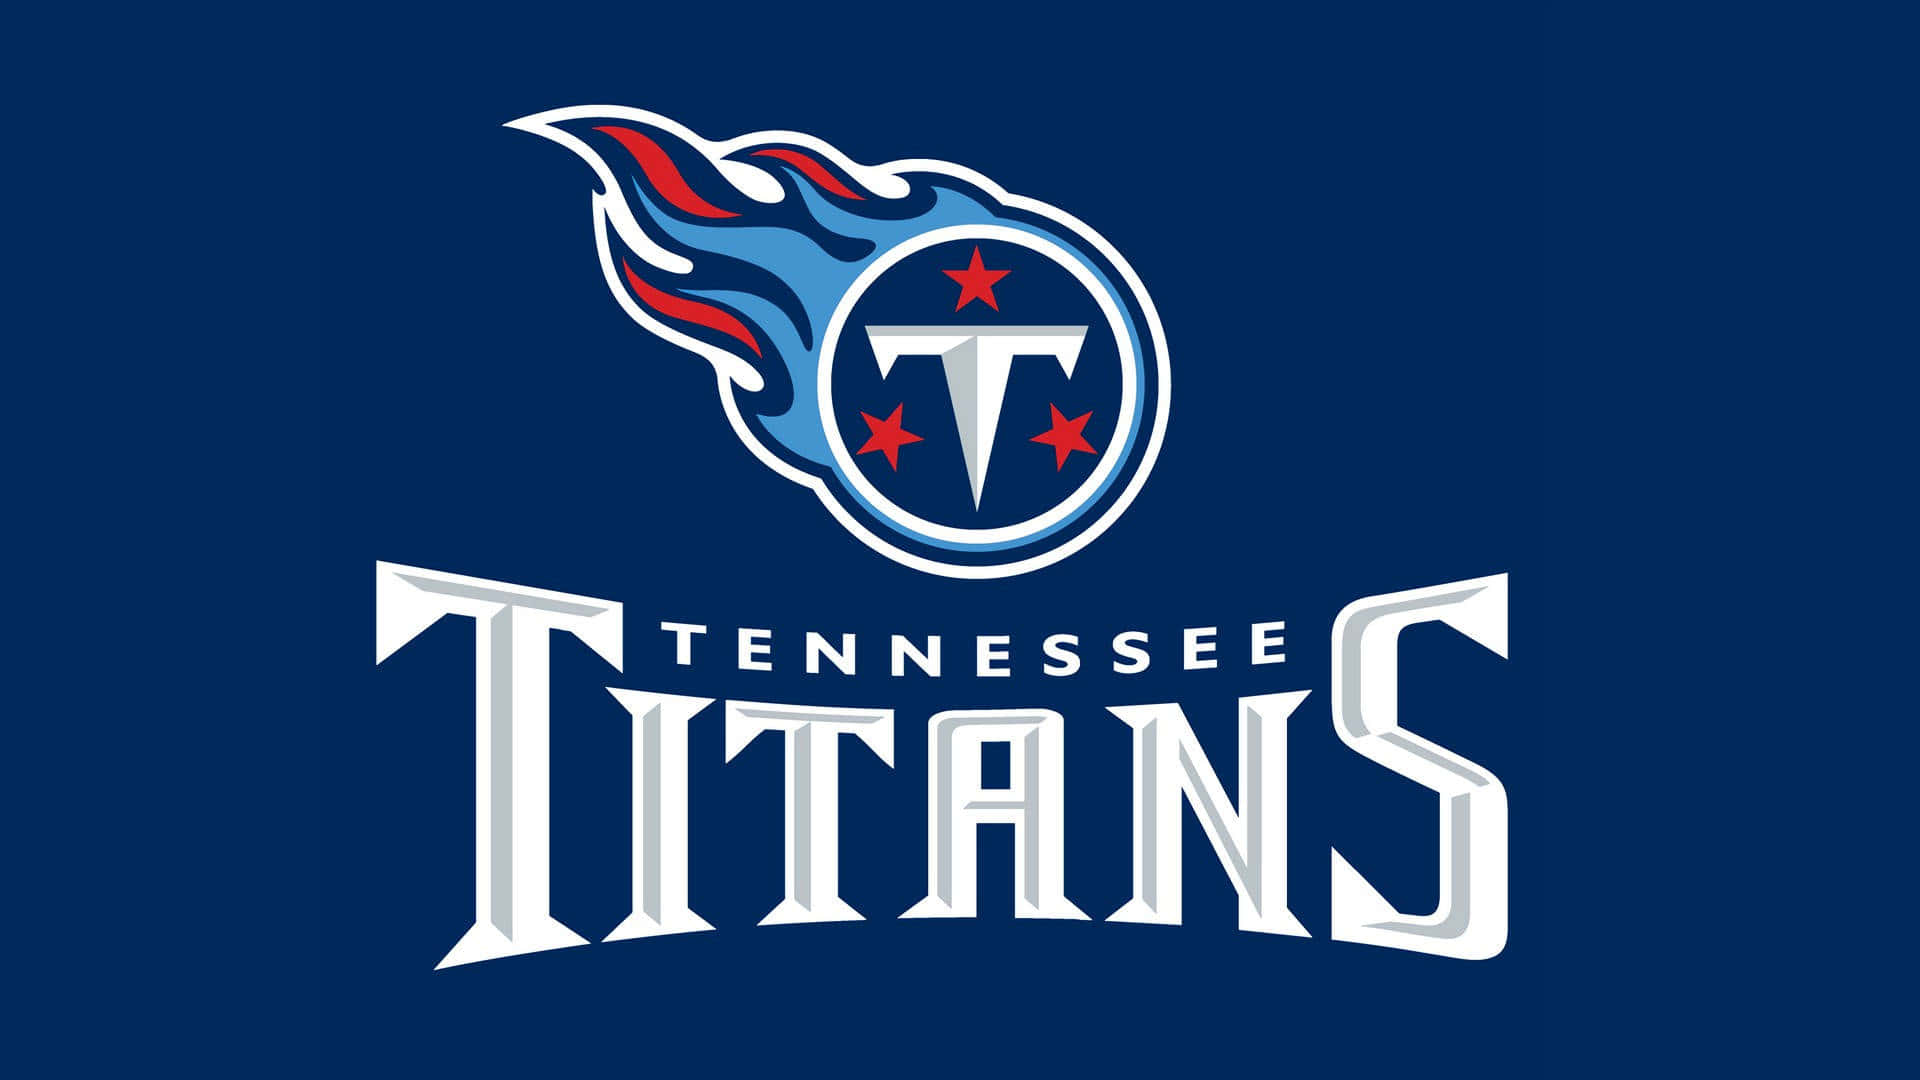 Show your team pride with the Tennessee Titans iPhone Wallpaper